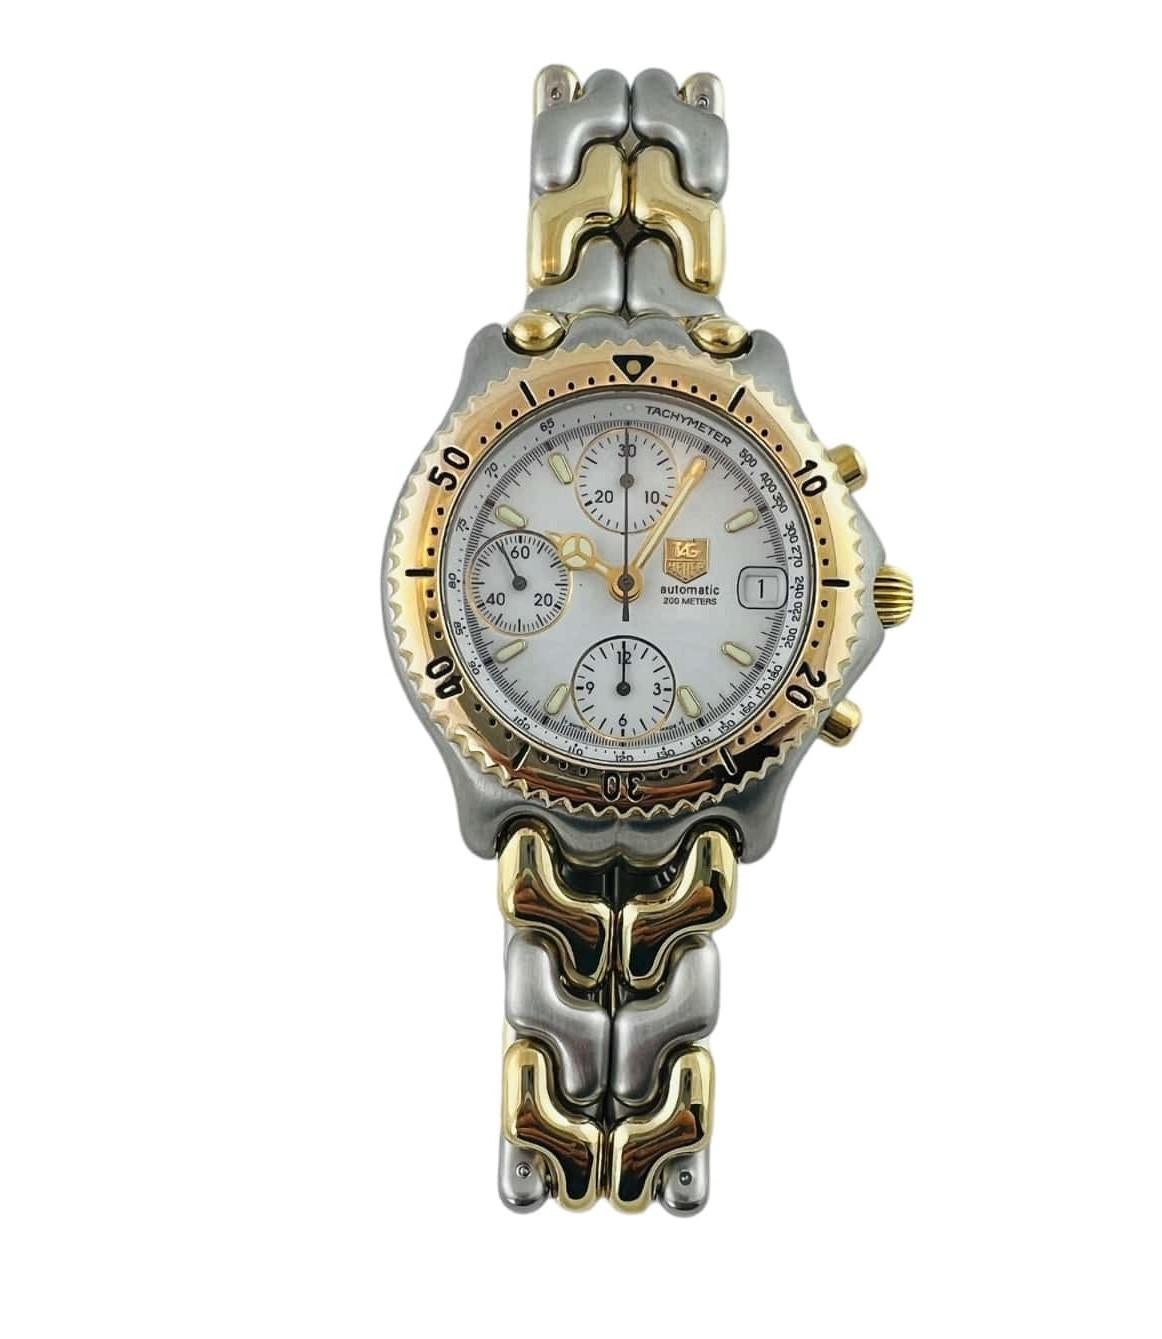 TAG Heuer Two Tone Link Watch

Model: CG2120-RO
Serial: RW2923

This two tone chronograph watch is set in stainless steel with gold accents

White chronograph dial with gold and black markings

Date

Automatic movement

Fits up to 7 3/4